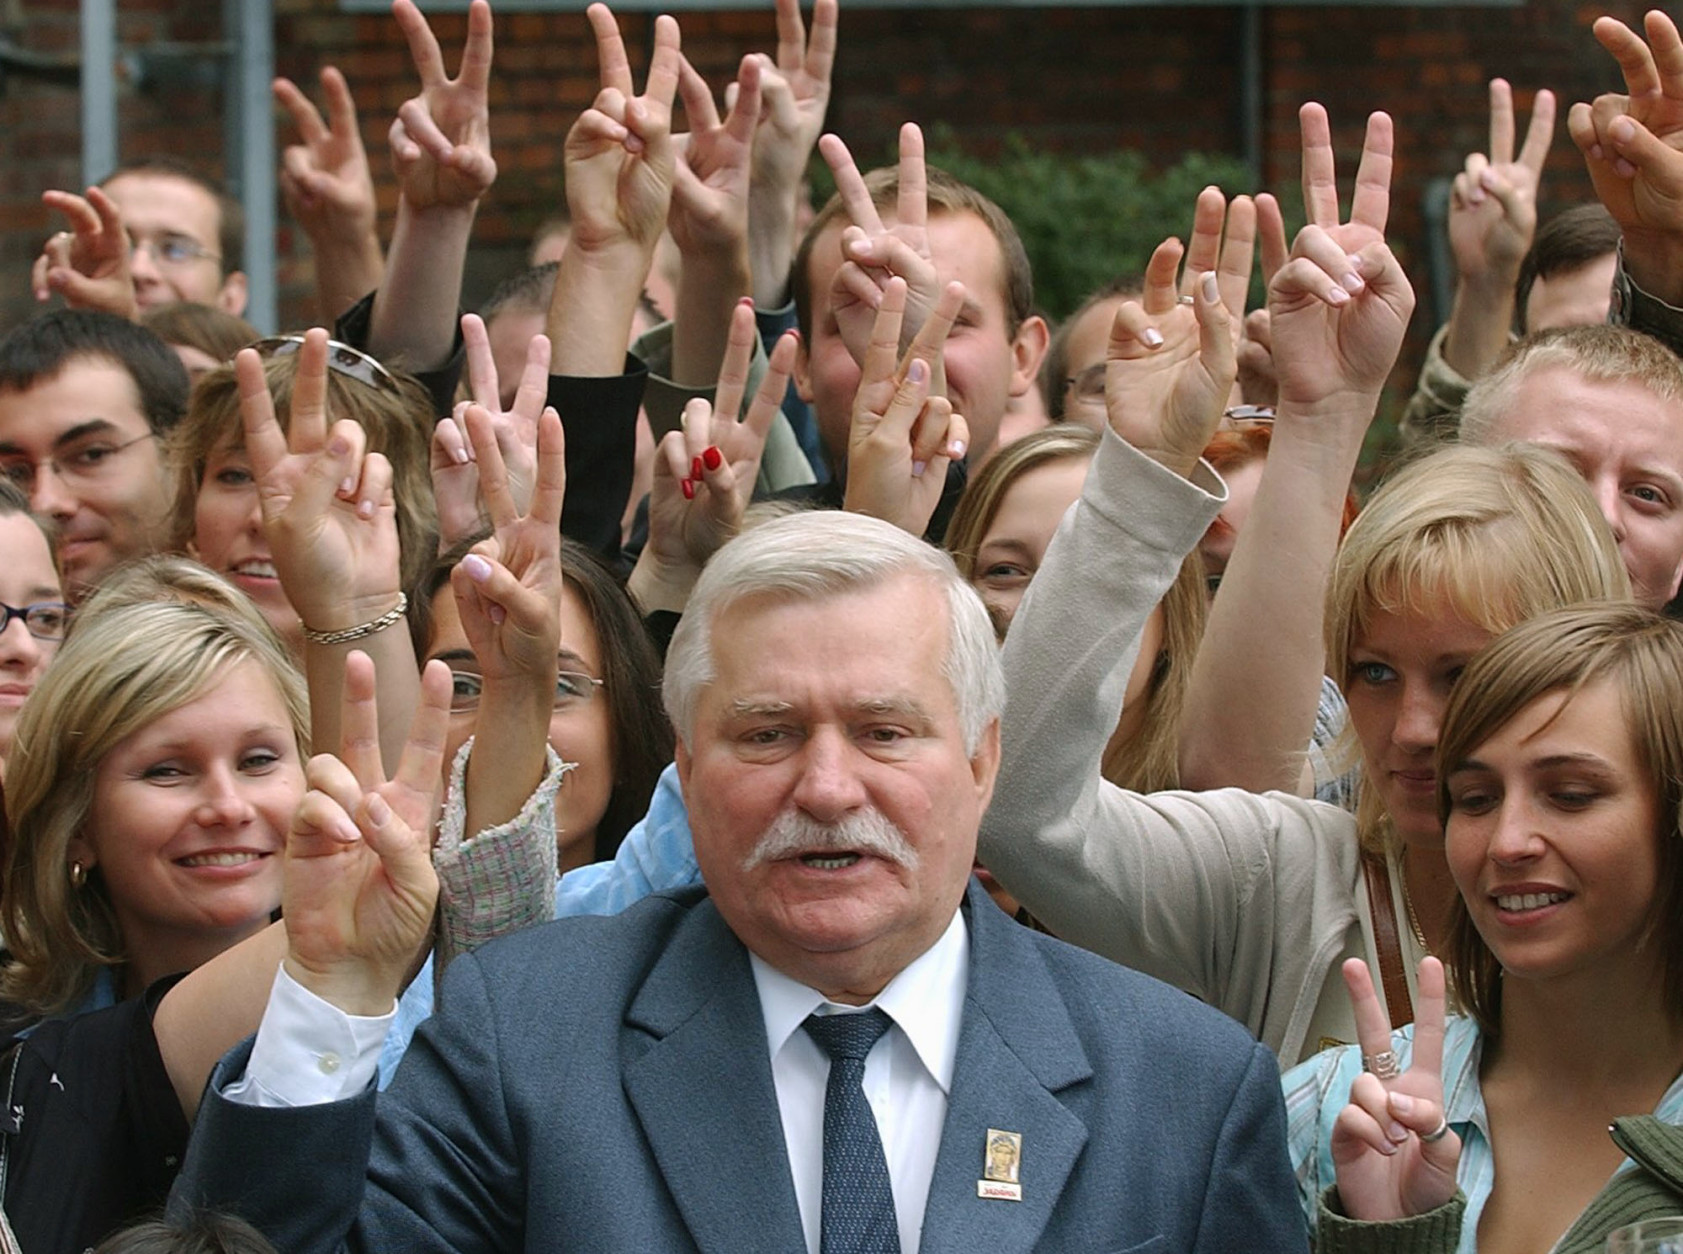 Poland's former president and Solidarity founder Lech Walesa, center, flashes the Victory sign with some 200 young Poles born on Aug. 31, 1980, the day when the Solidarity freedom movement was born out of worker protests in the shipyards on the Baltic coast, including  Gdansk. Walesa attended a special birthday party for the young people at the Gdansk shipyard, Poland, on Tuesday, Aug. 30, 2005 as part of Solidarity 25th anniversary celebrations. ( AP Photo/Czarek Sokolowski)